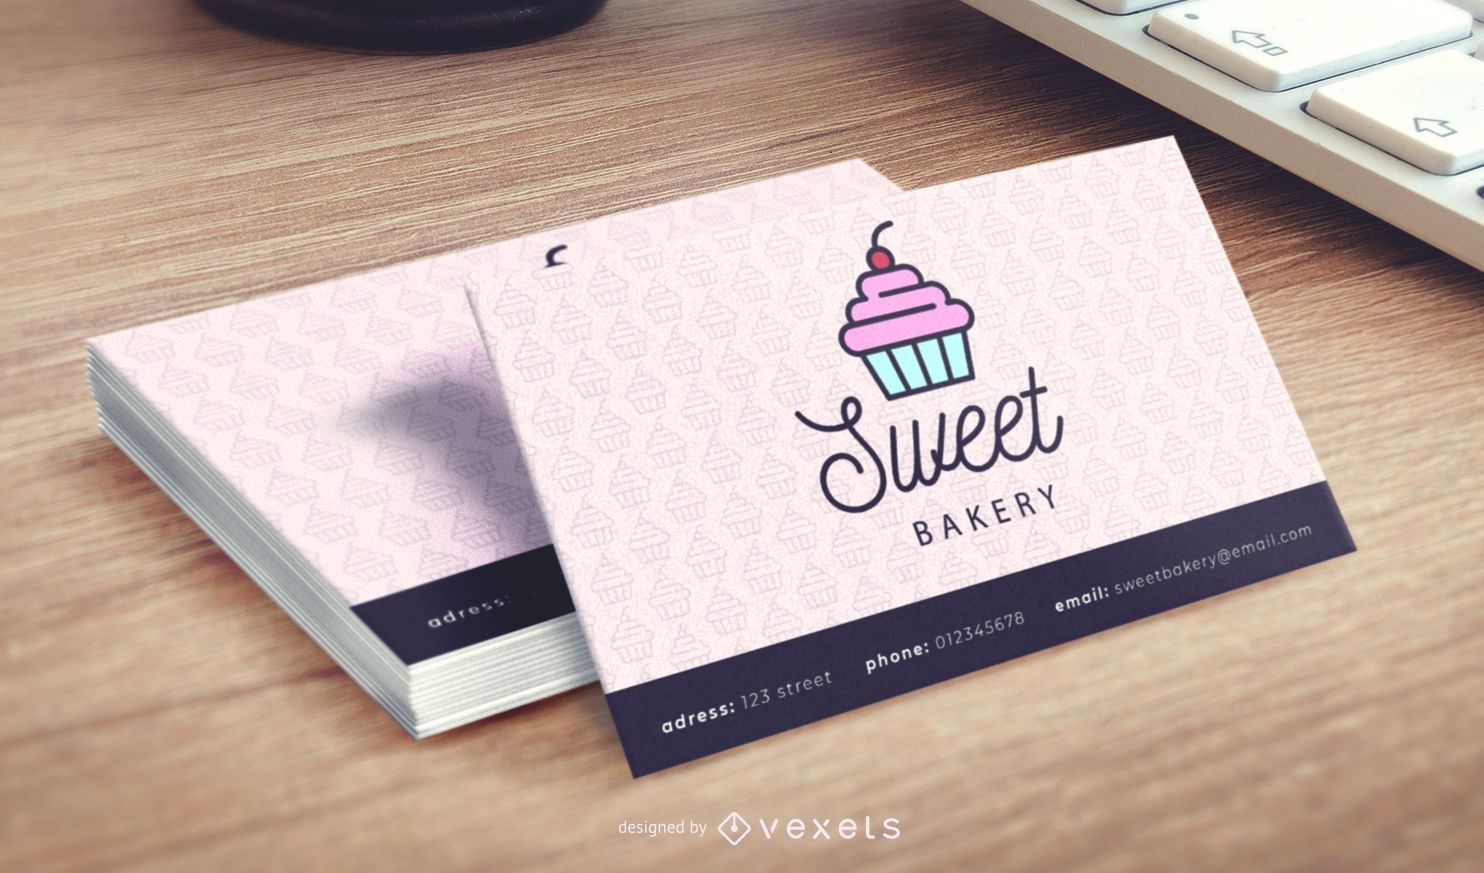 bakery-shop-business-card-template-vector-download